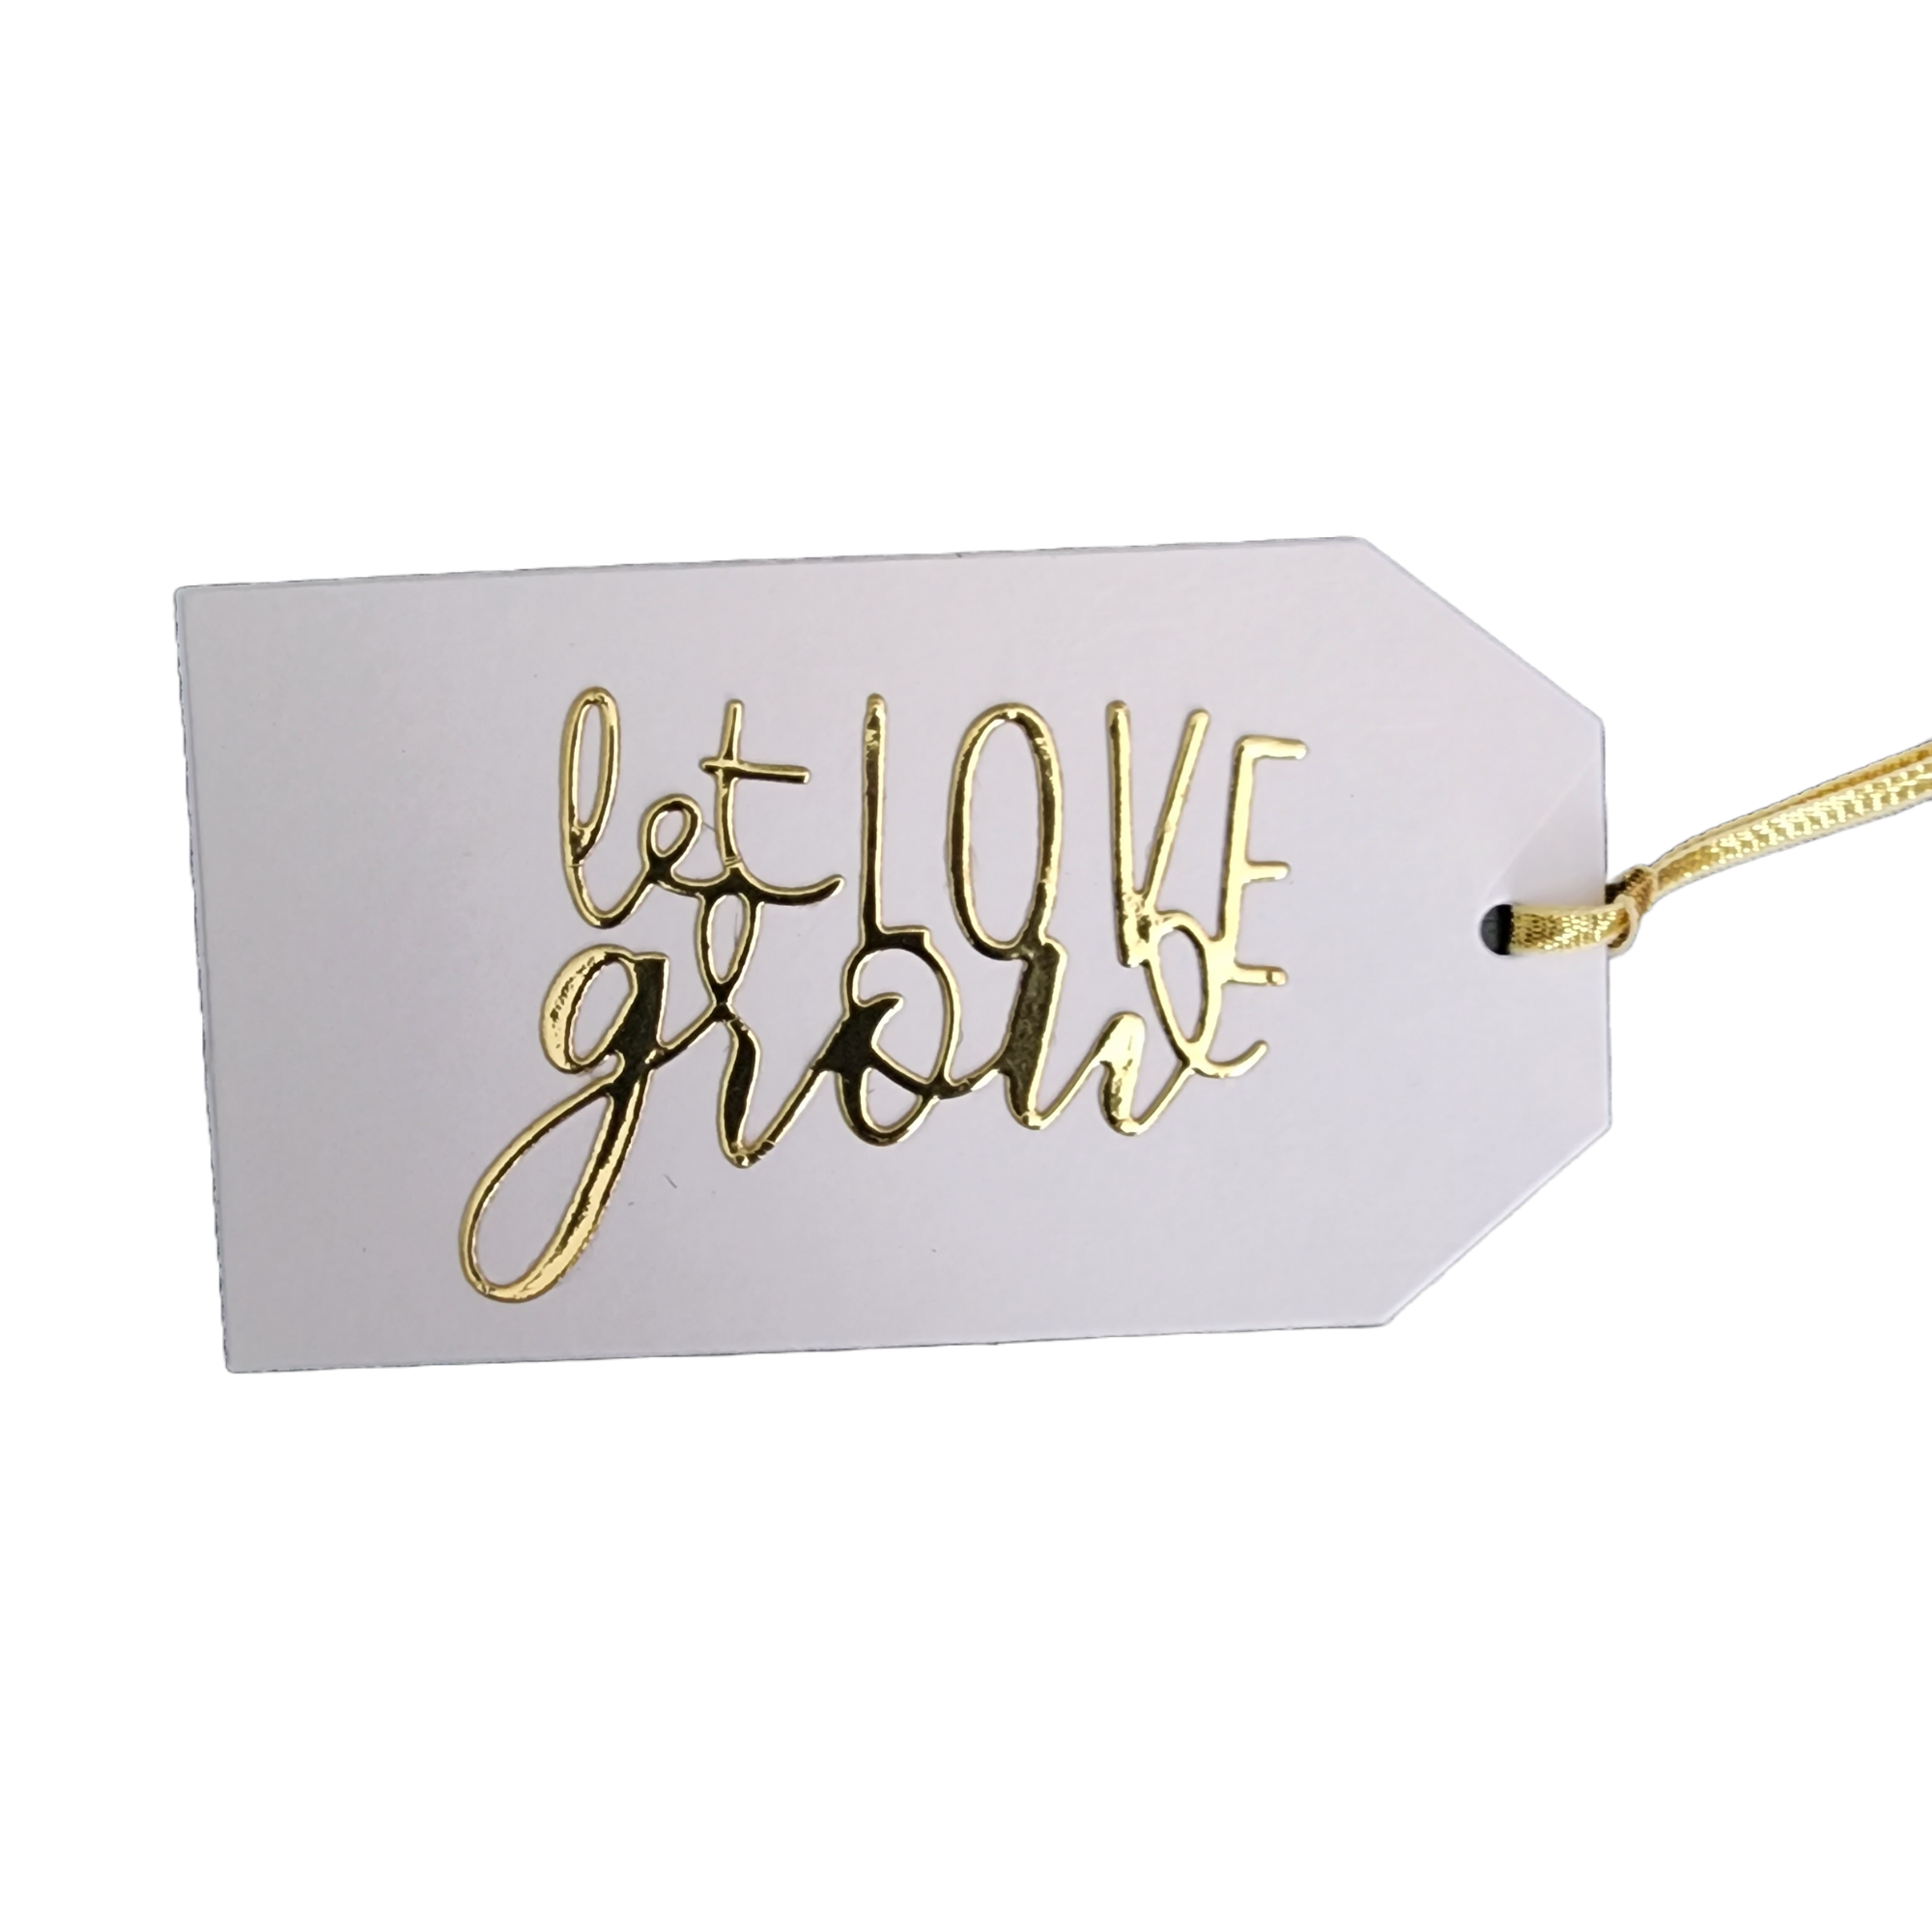 Let Love Grow Handmade Gift Tag in Gold Foil to accompany plant gifts. Plant lovers.